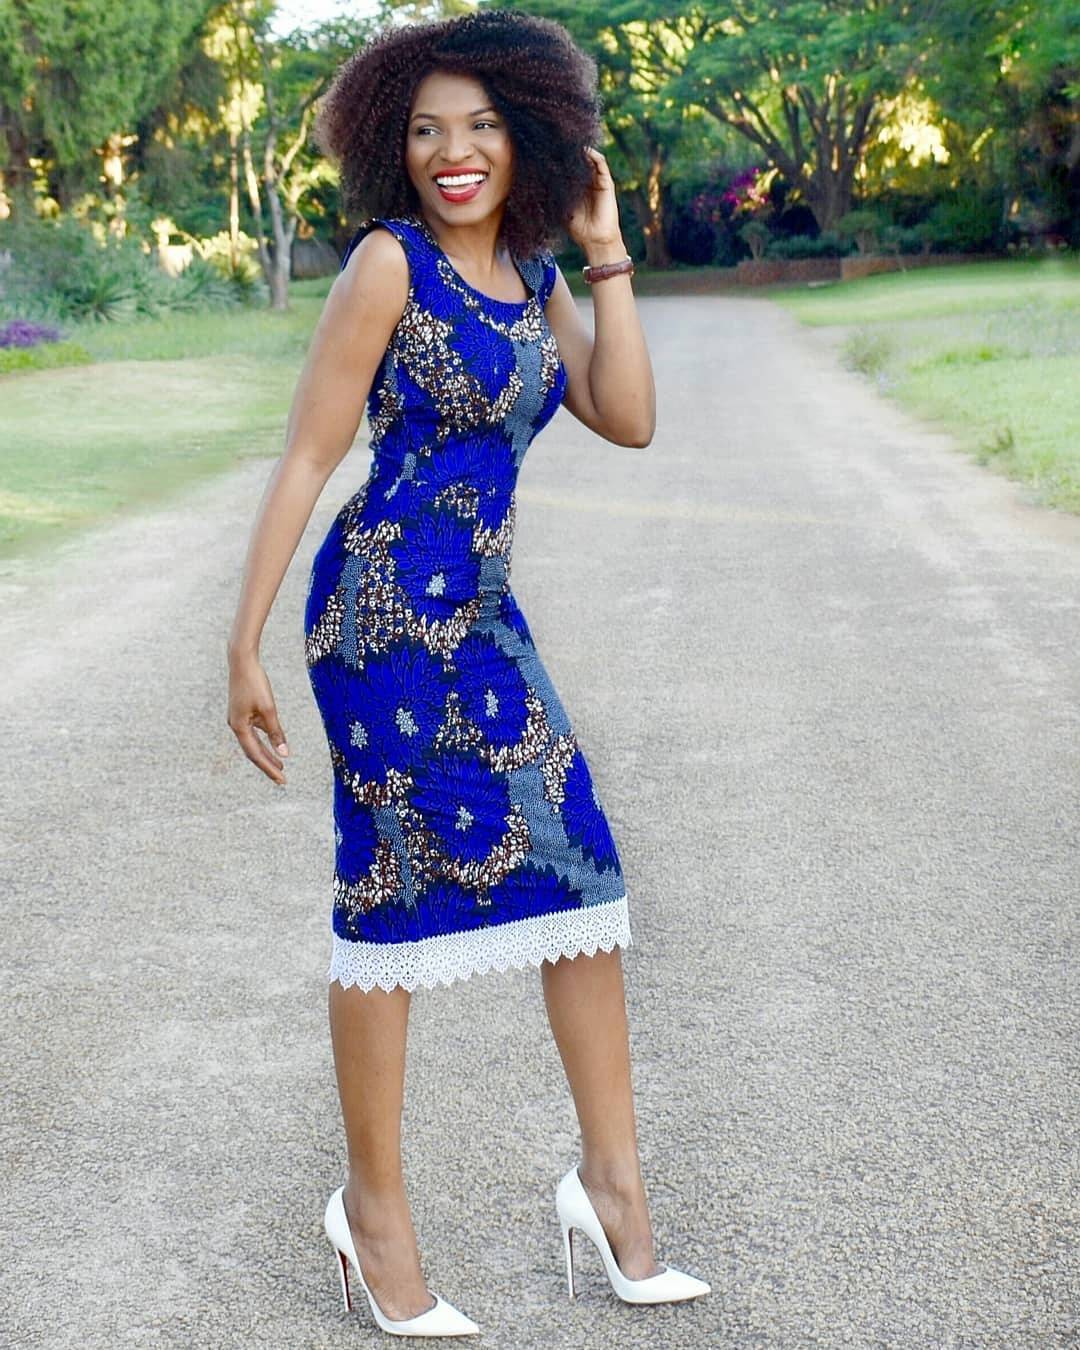 These Sexy Unique Ankara Styles Will Wow You!